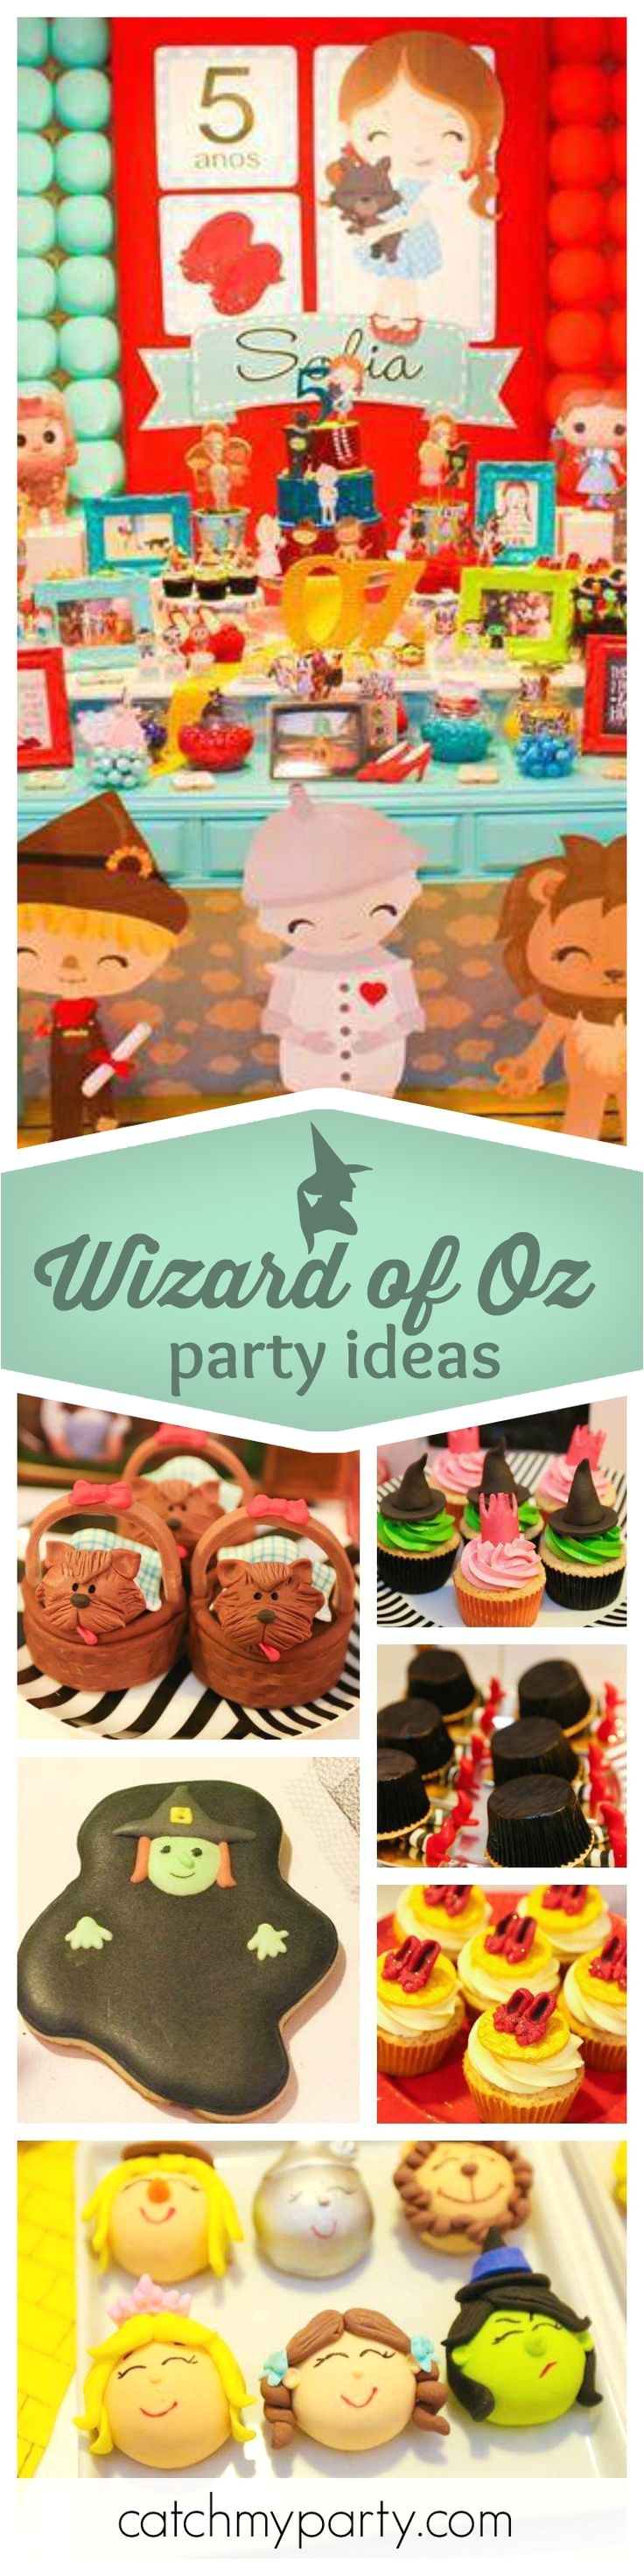 follow the yellow brick brick and have fun in oz this wizard of oz party